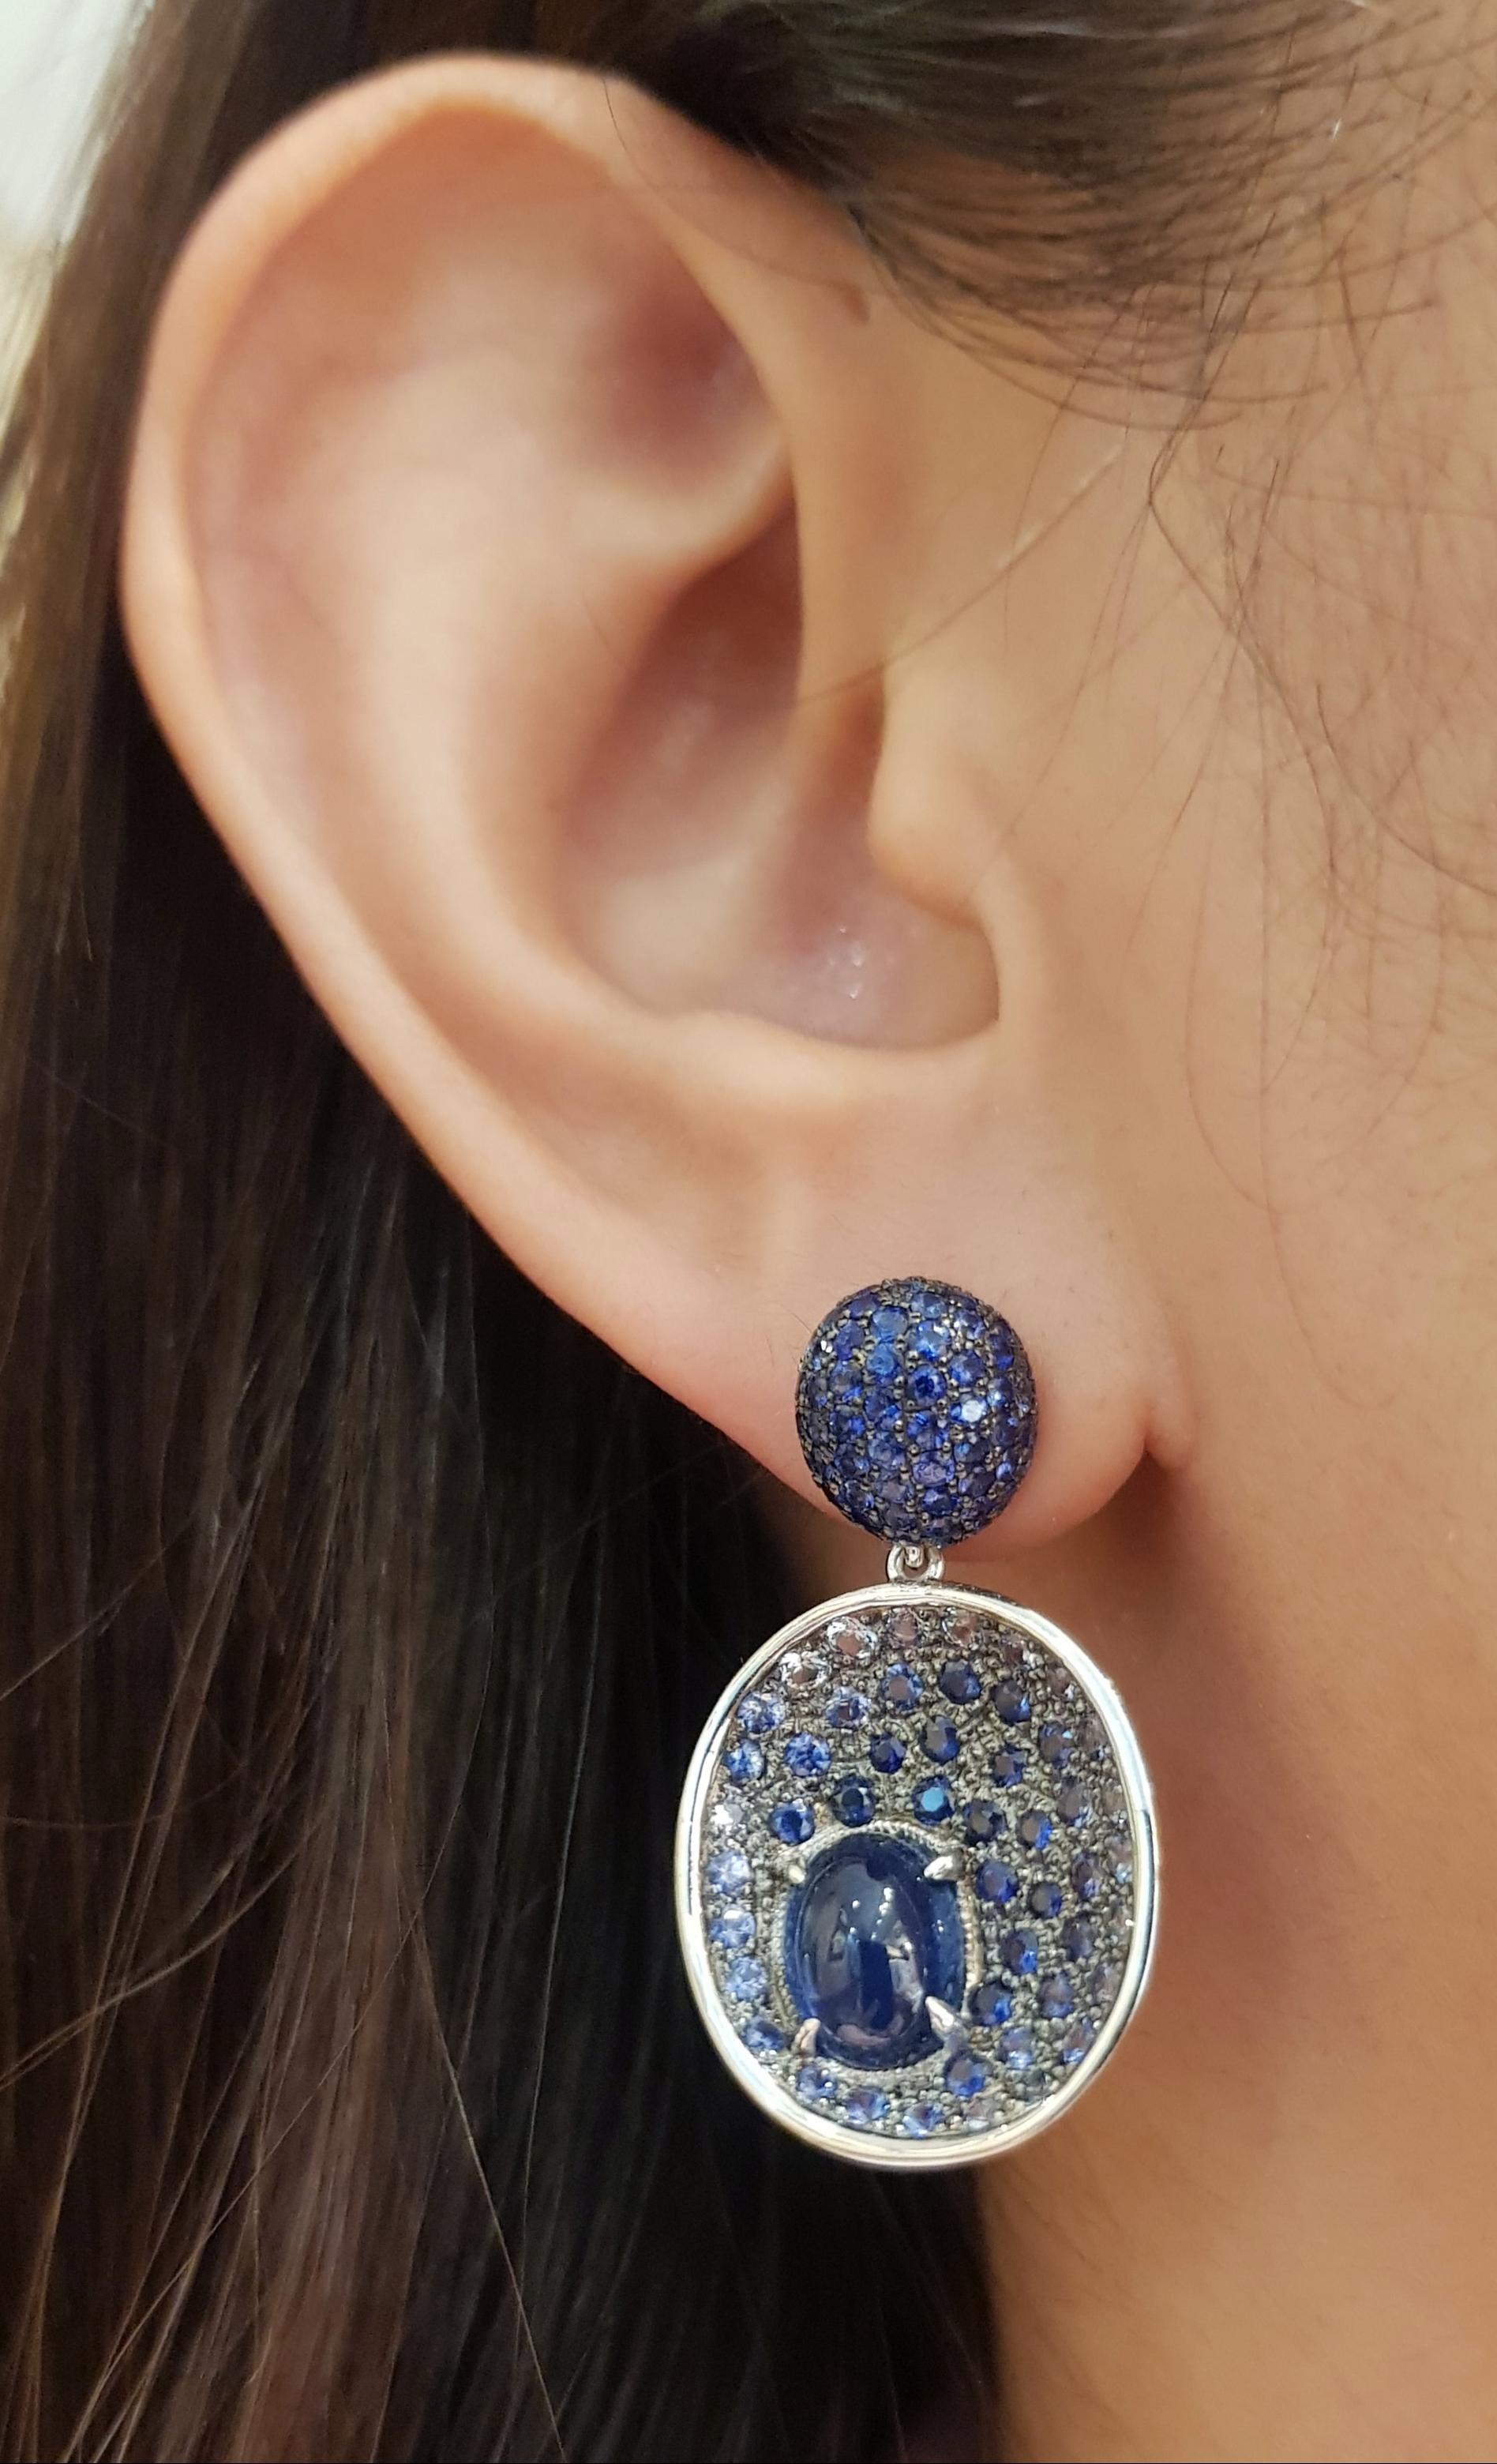 Cabochon Blue Sapphire 7.60 carats with Blue Sapphire 6.82 carats Earrings set in 18 Karat White Gold Settings

Width: 1.8 cm 
Length: 3.4 cm
Total Weight: 15.38  grams

